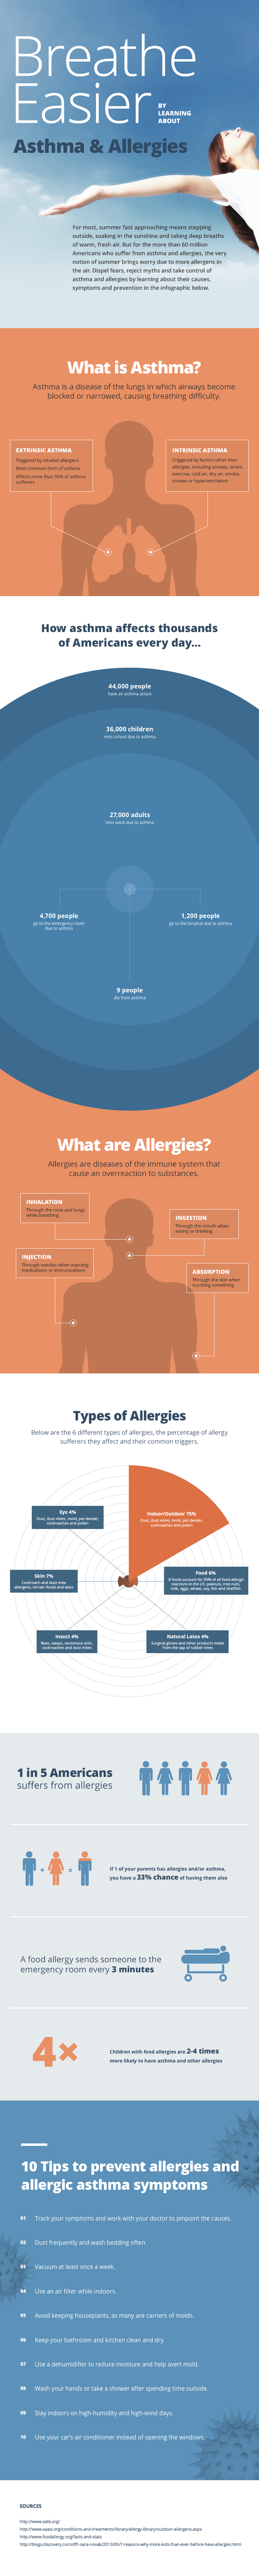 Infographic-Asthma-Allergies-0.2